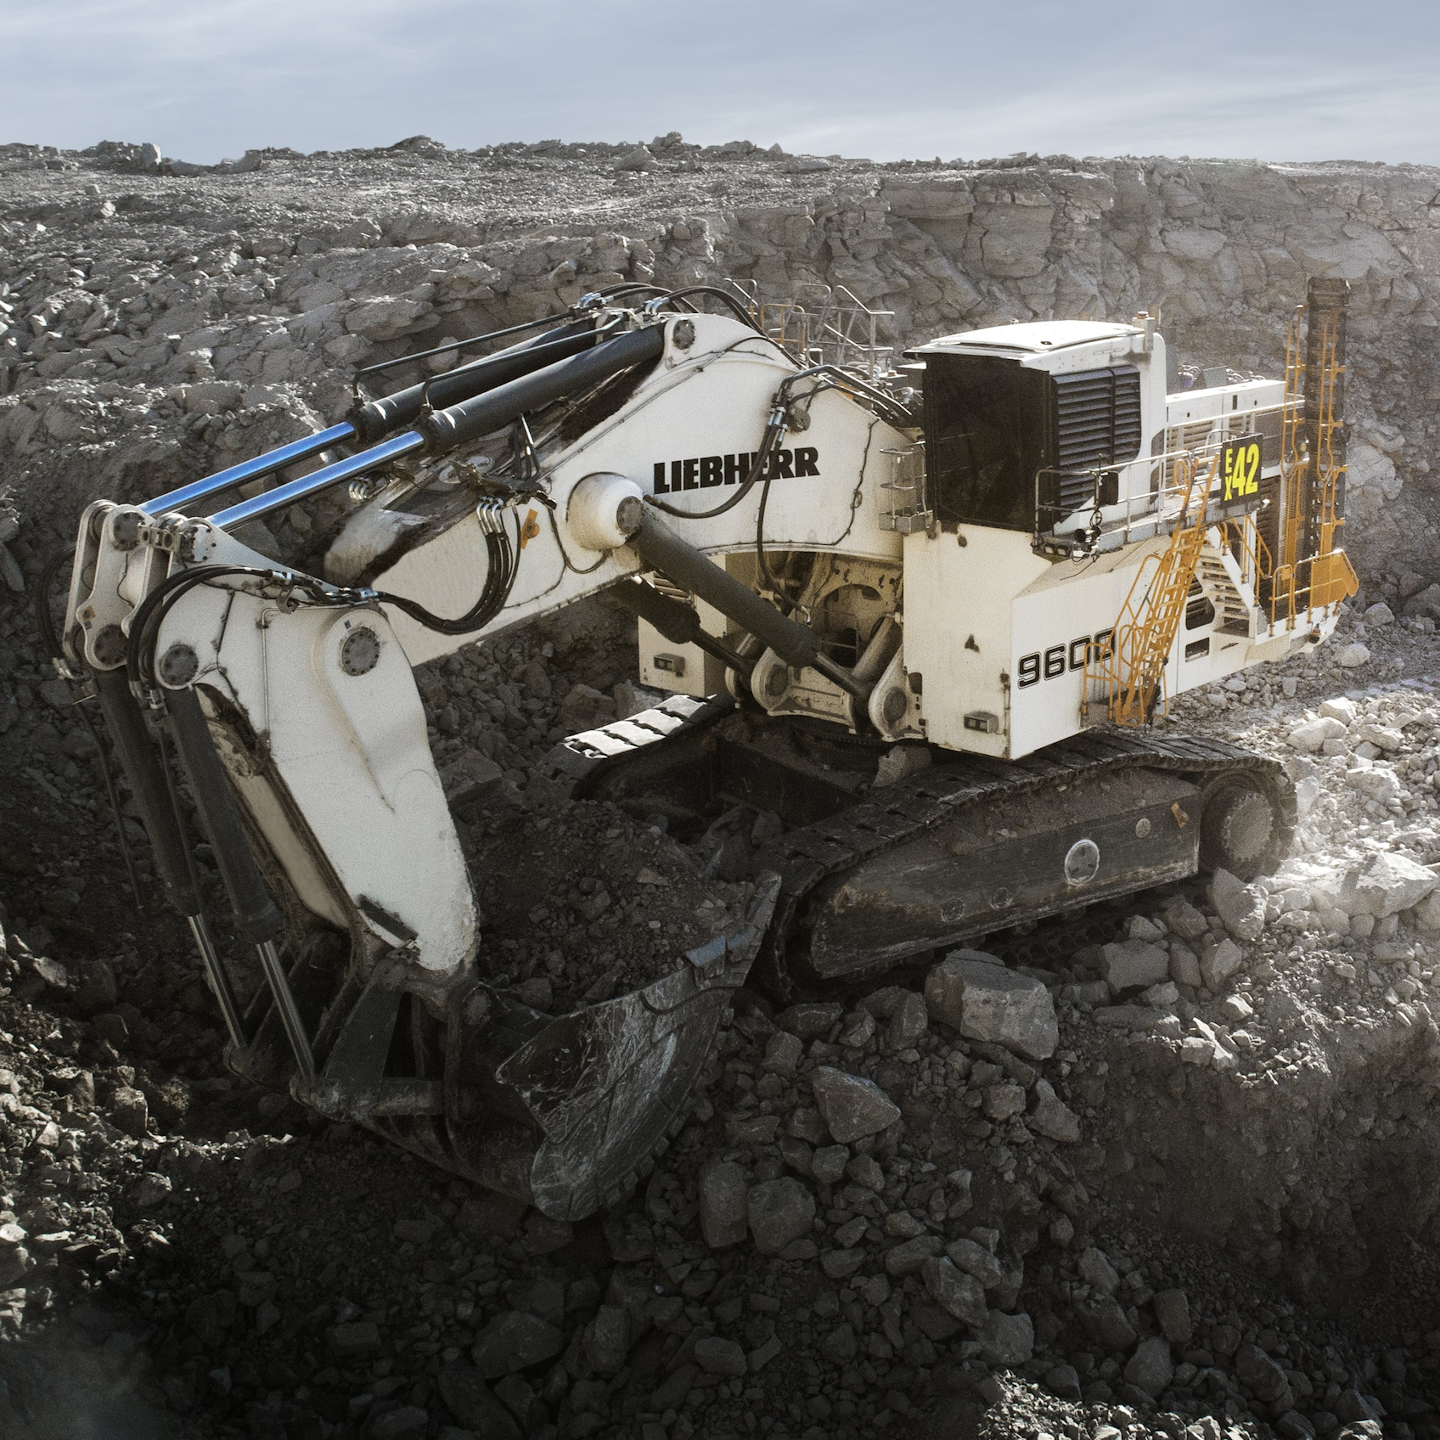 The R9600 is one of three new excavators Liebherr is debuting at MINExpo.